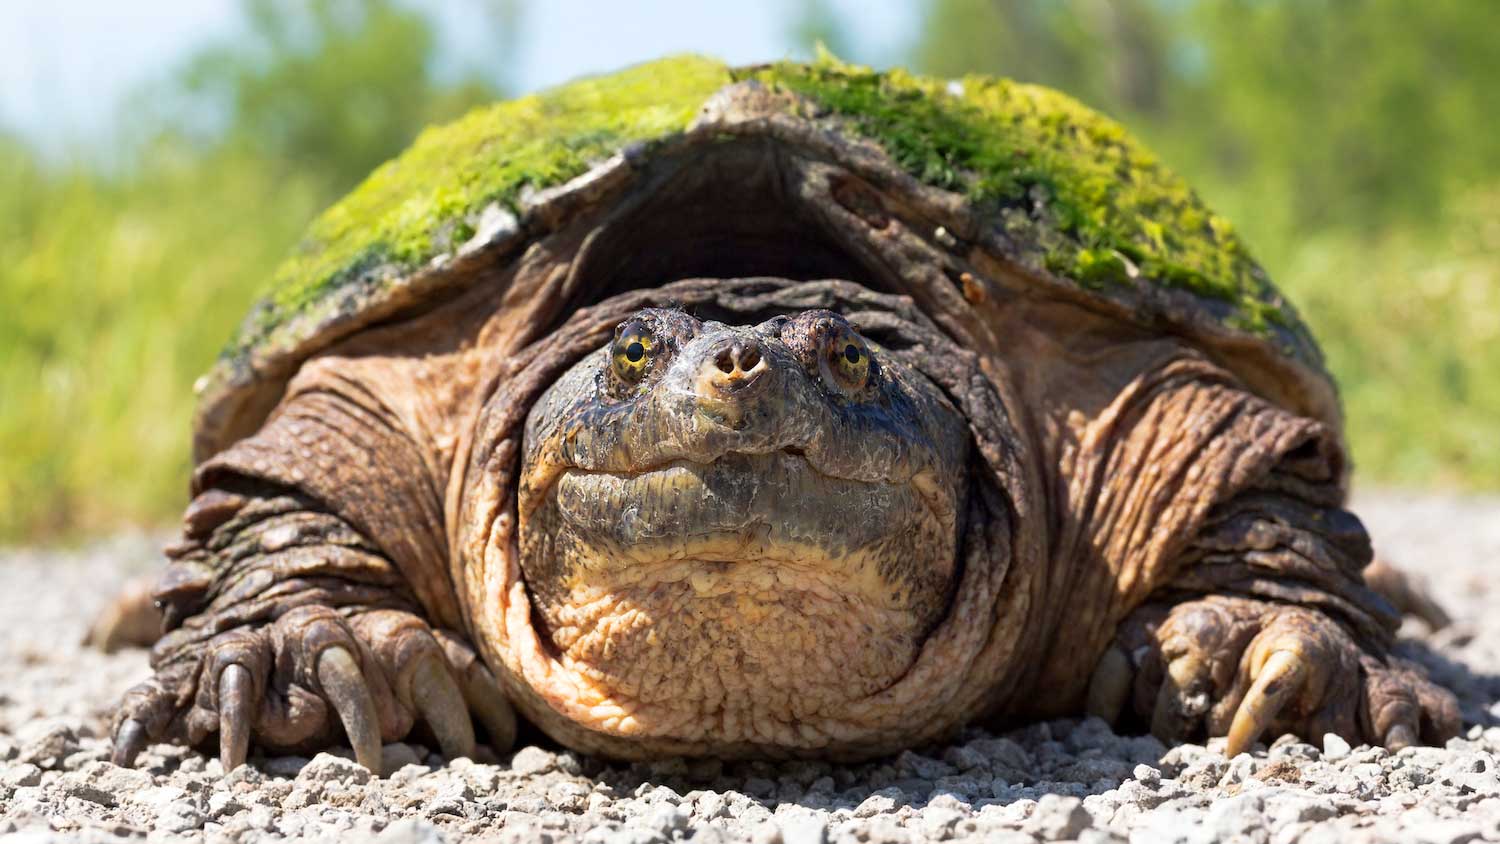 Snapping-turtle-Shutterstock